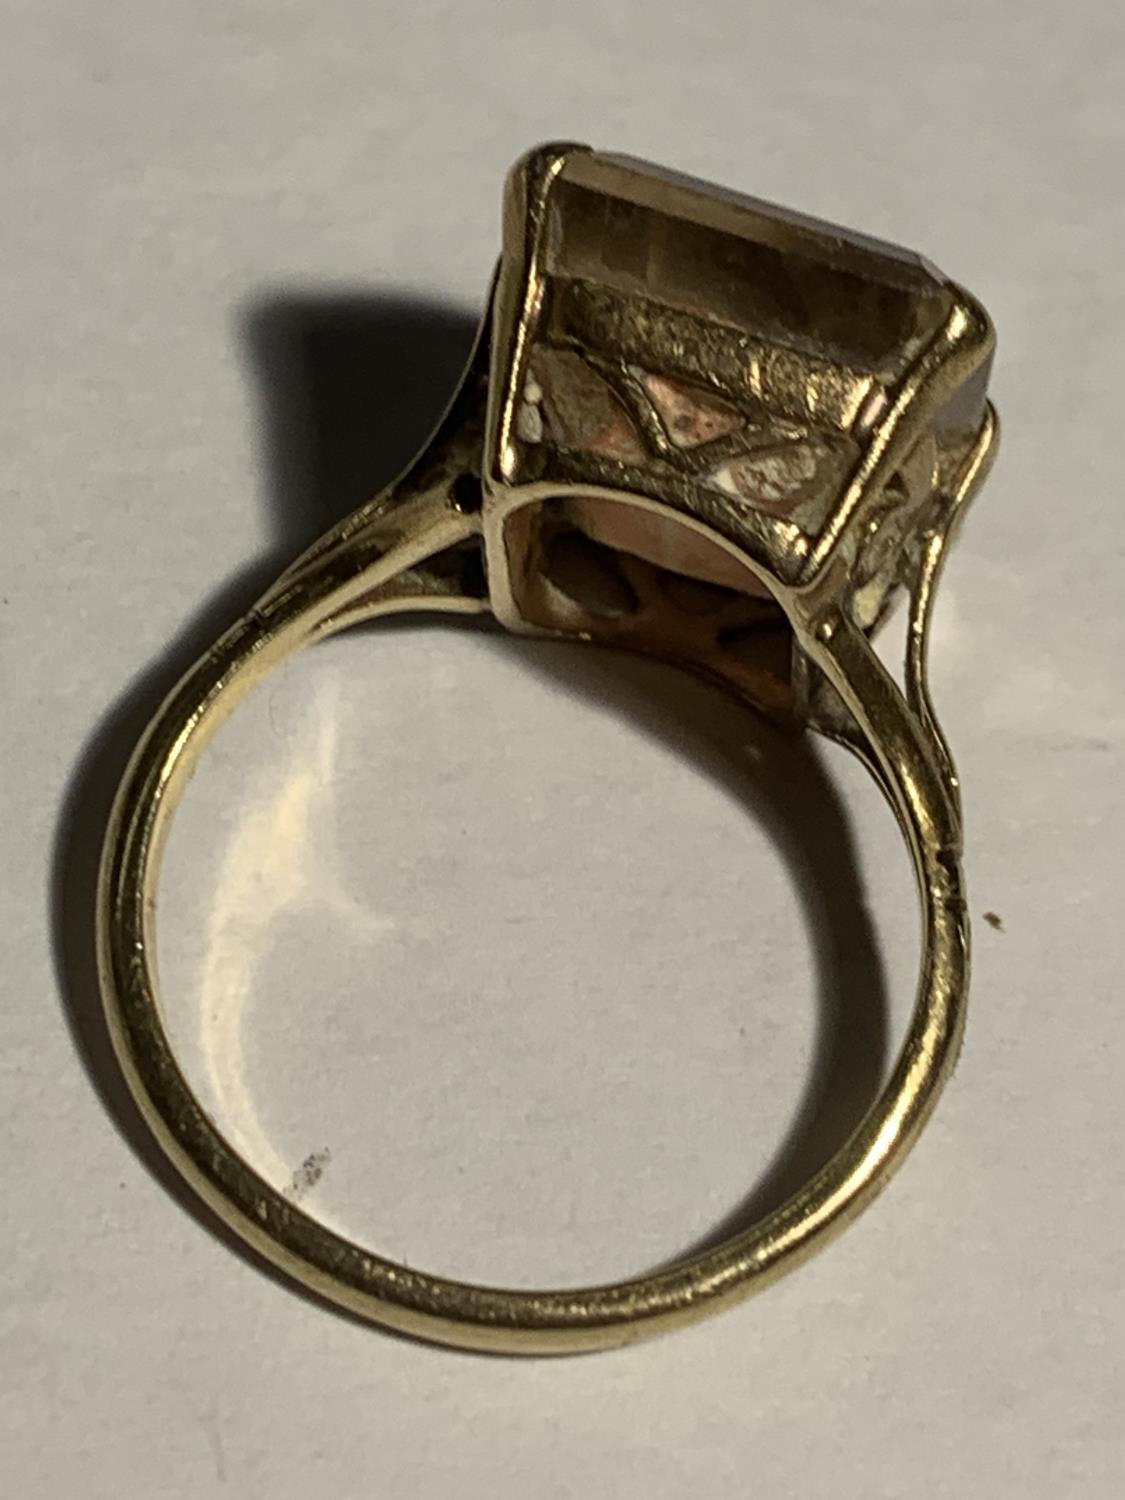 A 9 CARAT GOLD RING WITH A LARGE CORAL TINGED CENTRE STONE SIZE N/O GROSS WEIGHT 4.8 GRAMS - Image 3 of 3